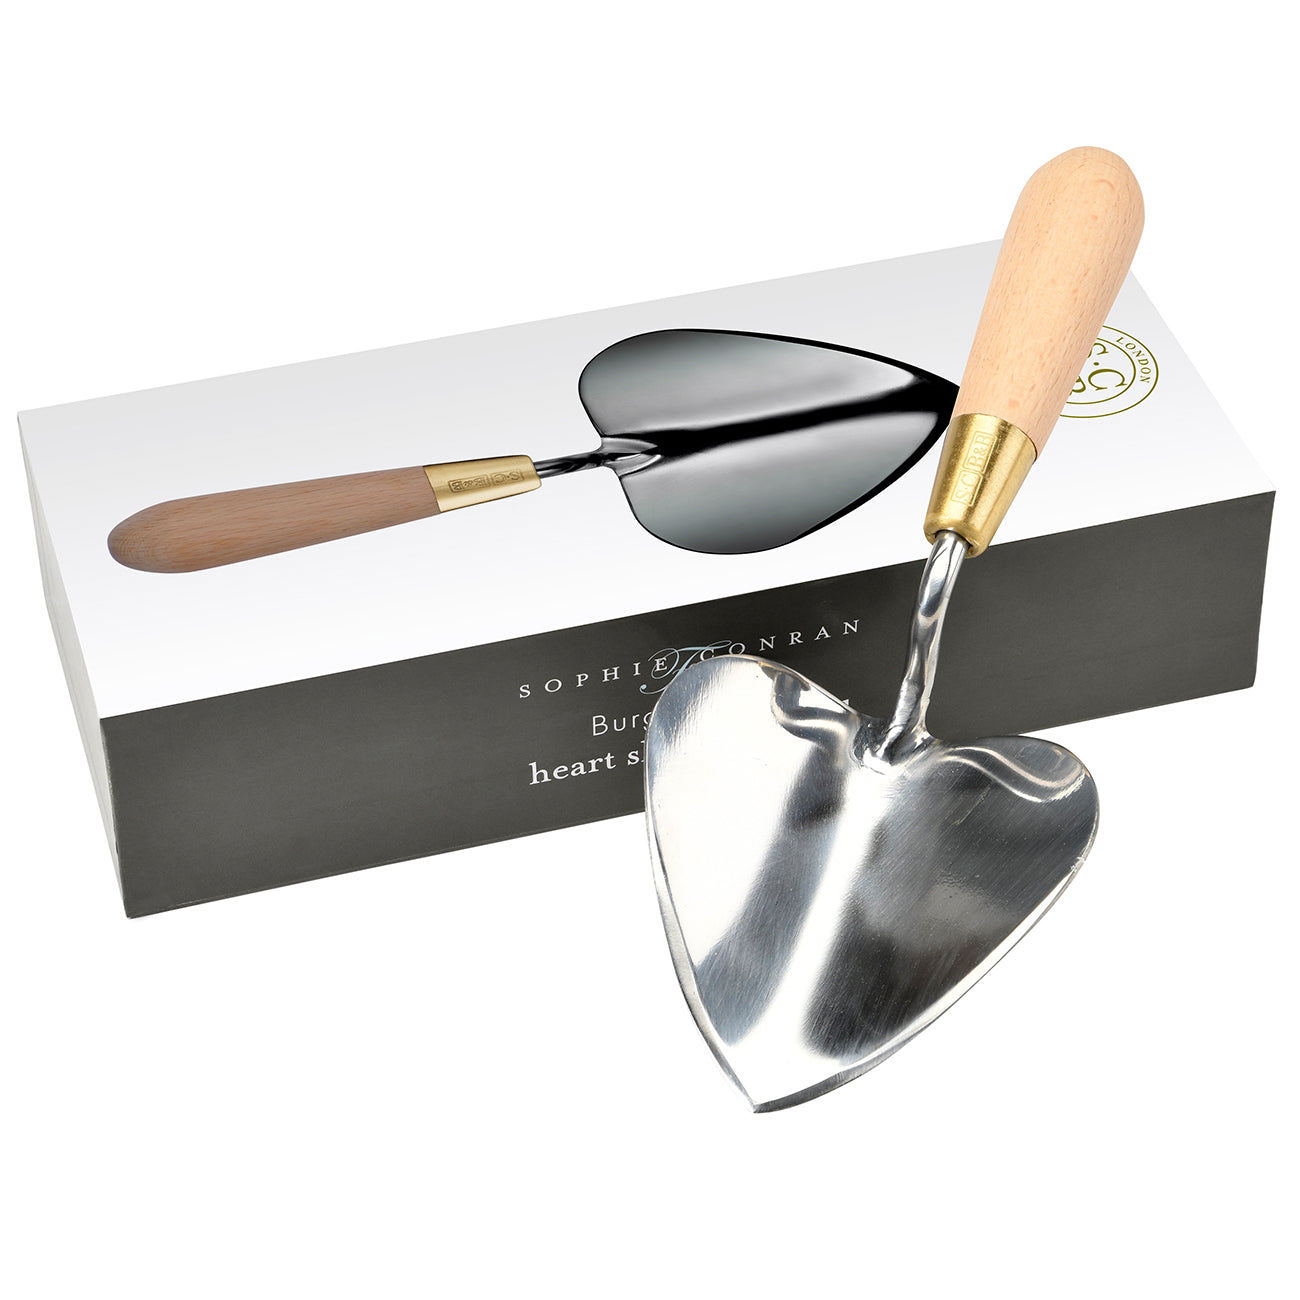 Sophie Conran for Burgon & Ball Heart-Shaped Trowel, Gift Boxed